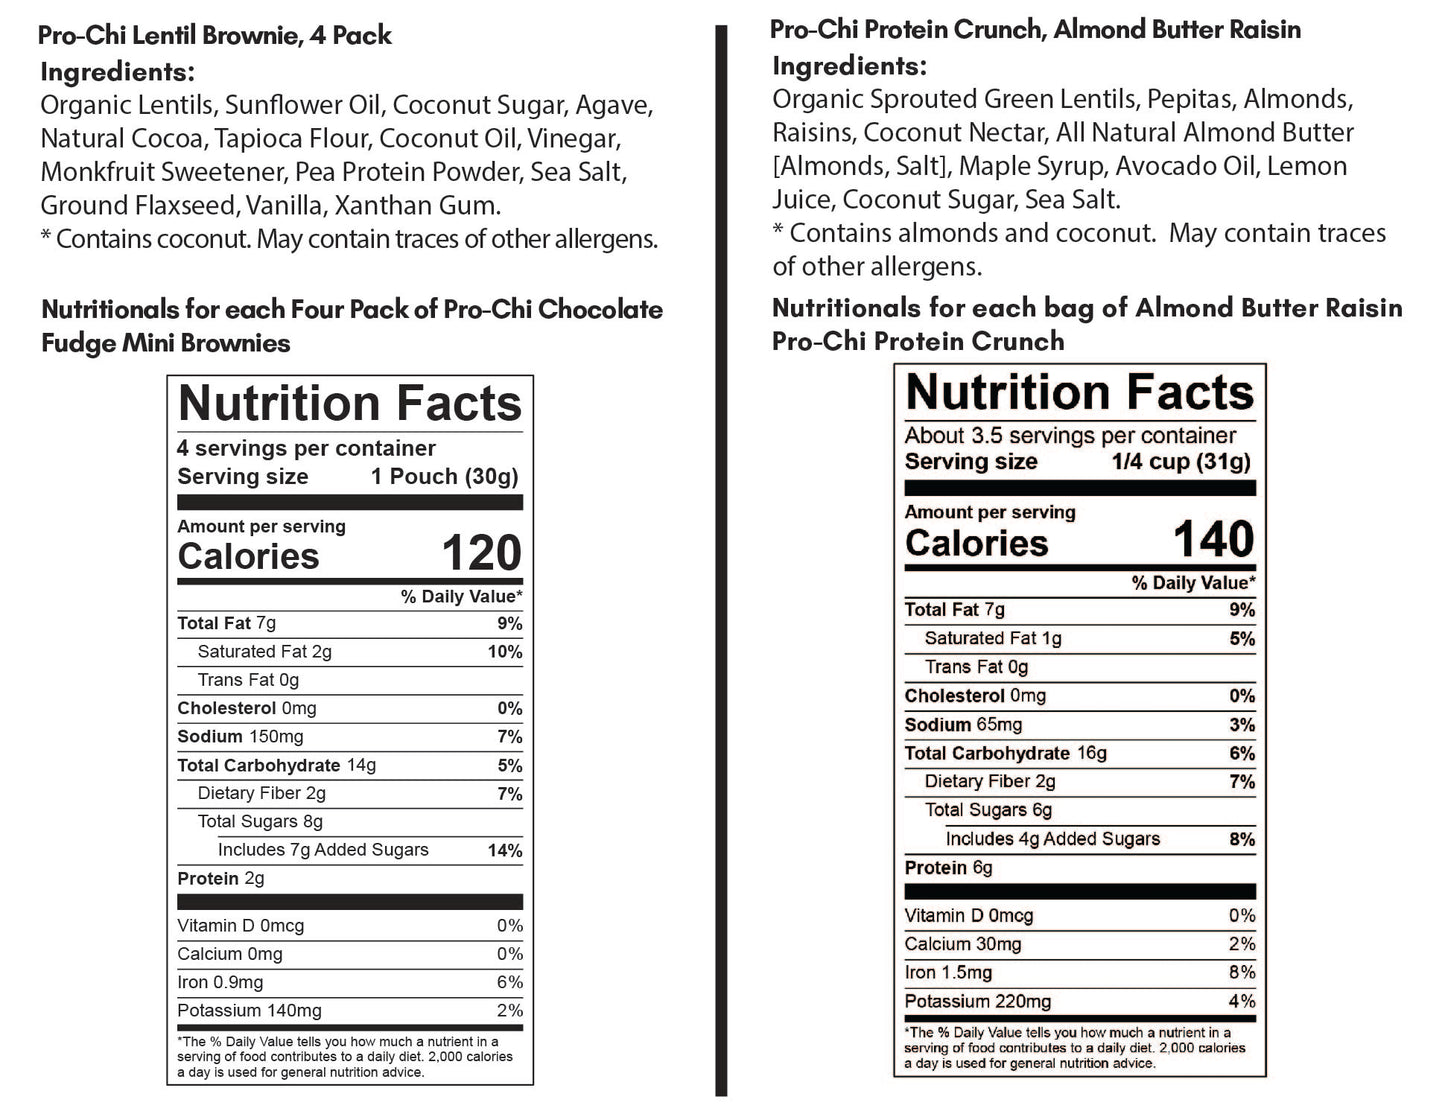 Nutritionals for healthy plant-based snacks